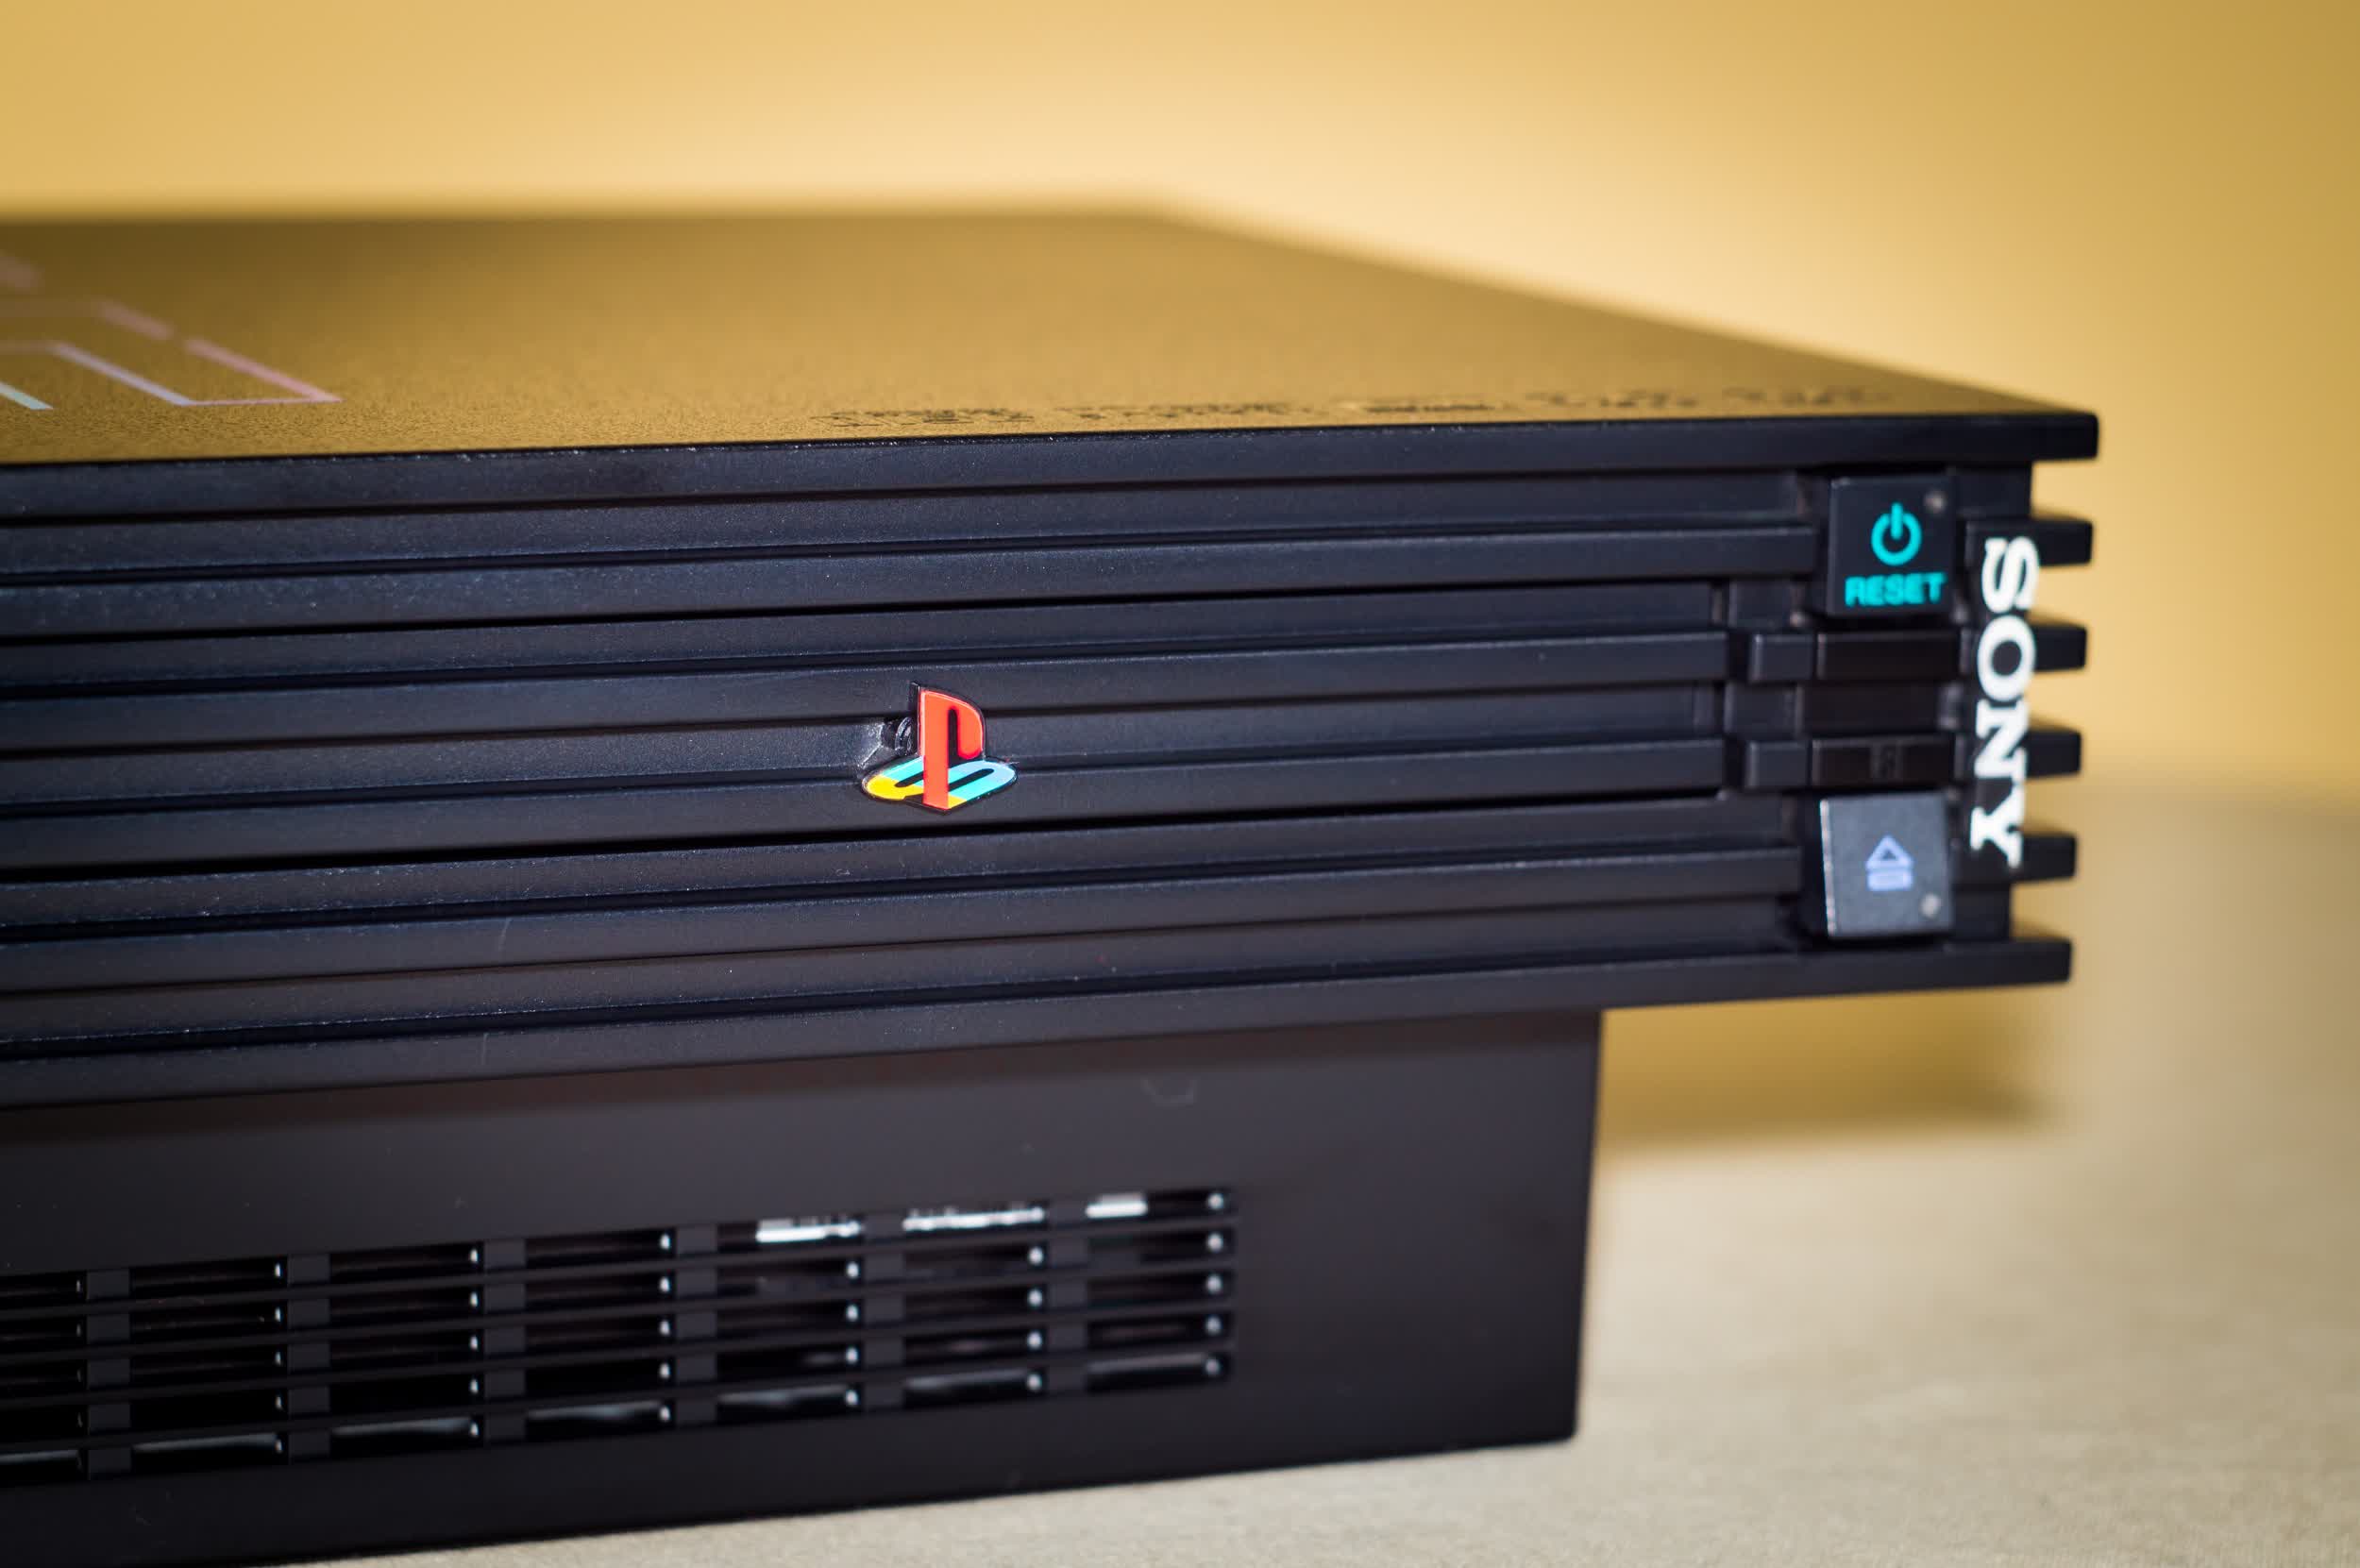 Game preservation group puts more than 700 PlayStation 2 prototypes and unreleased demos online